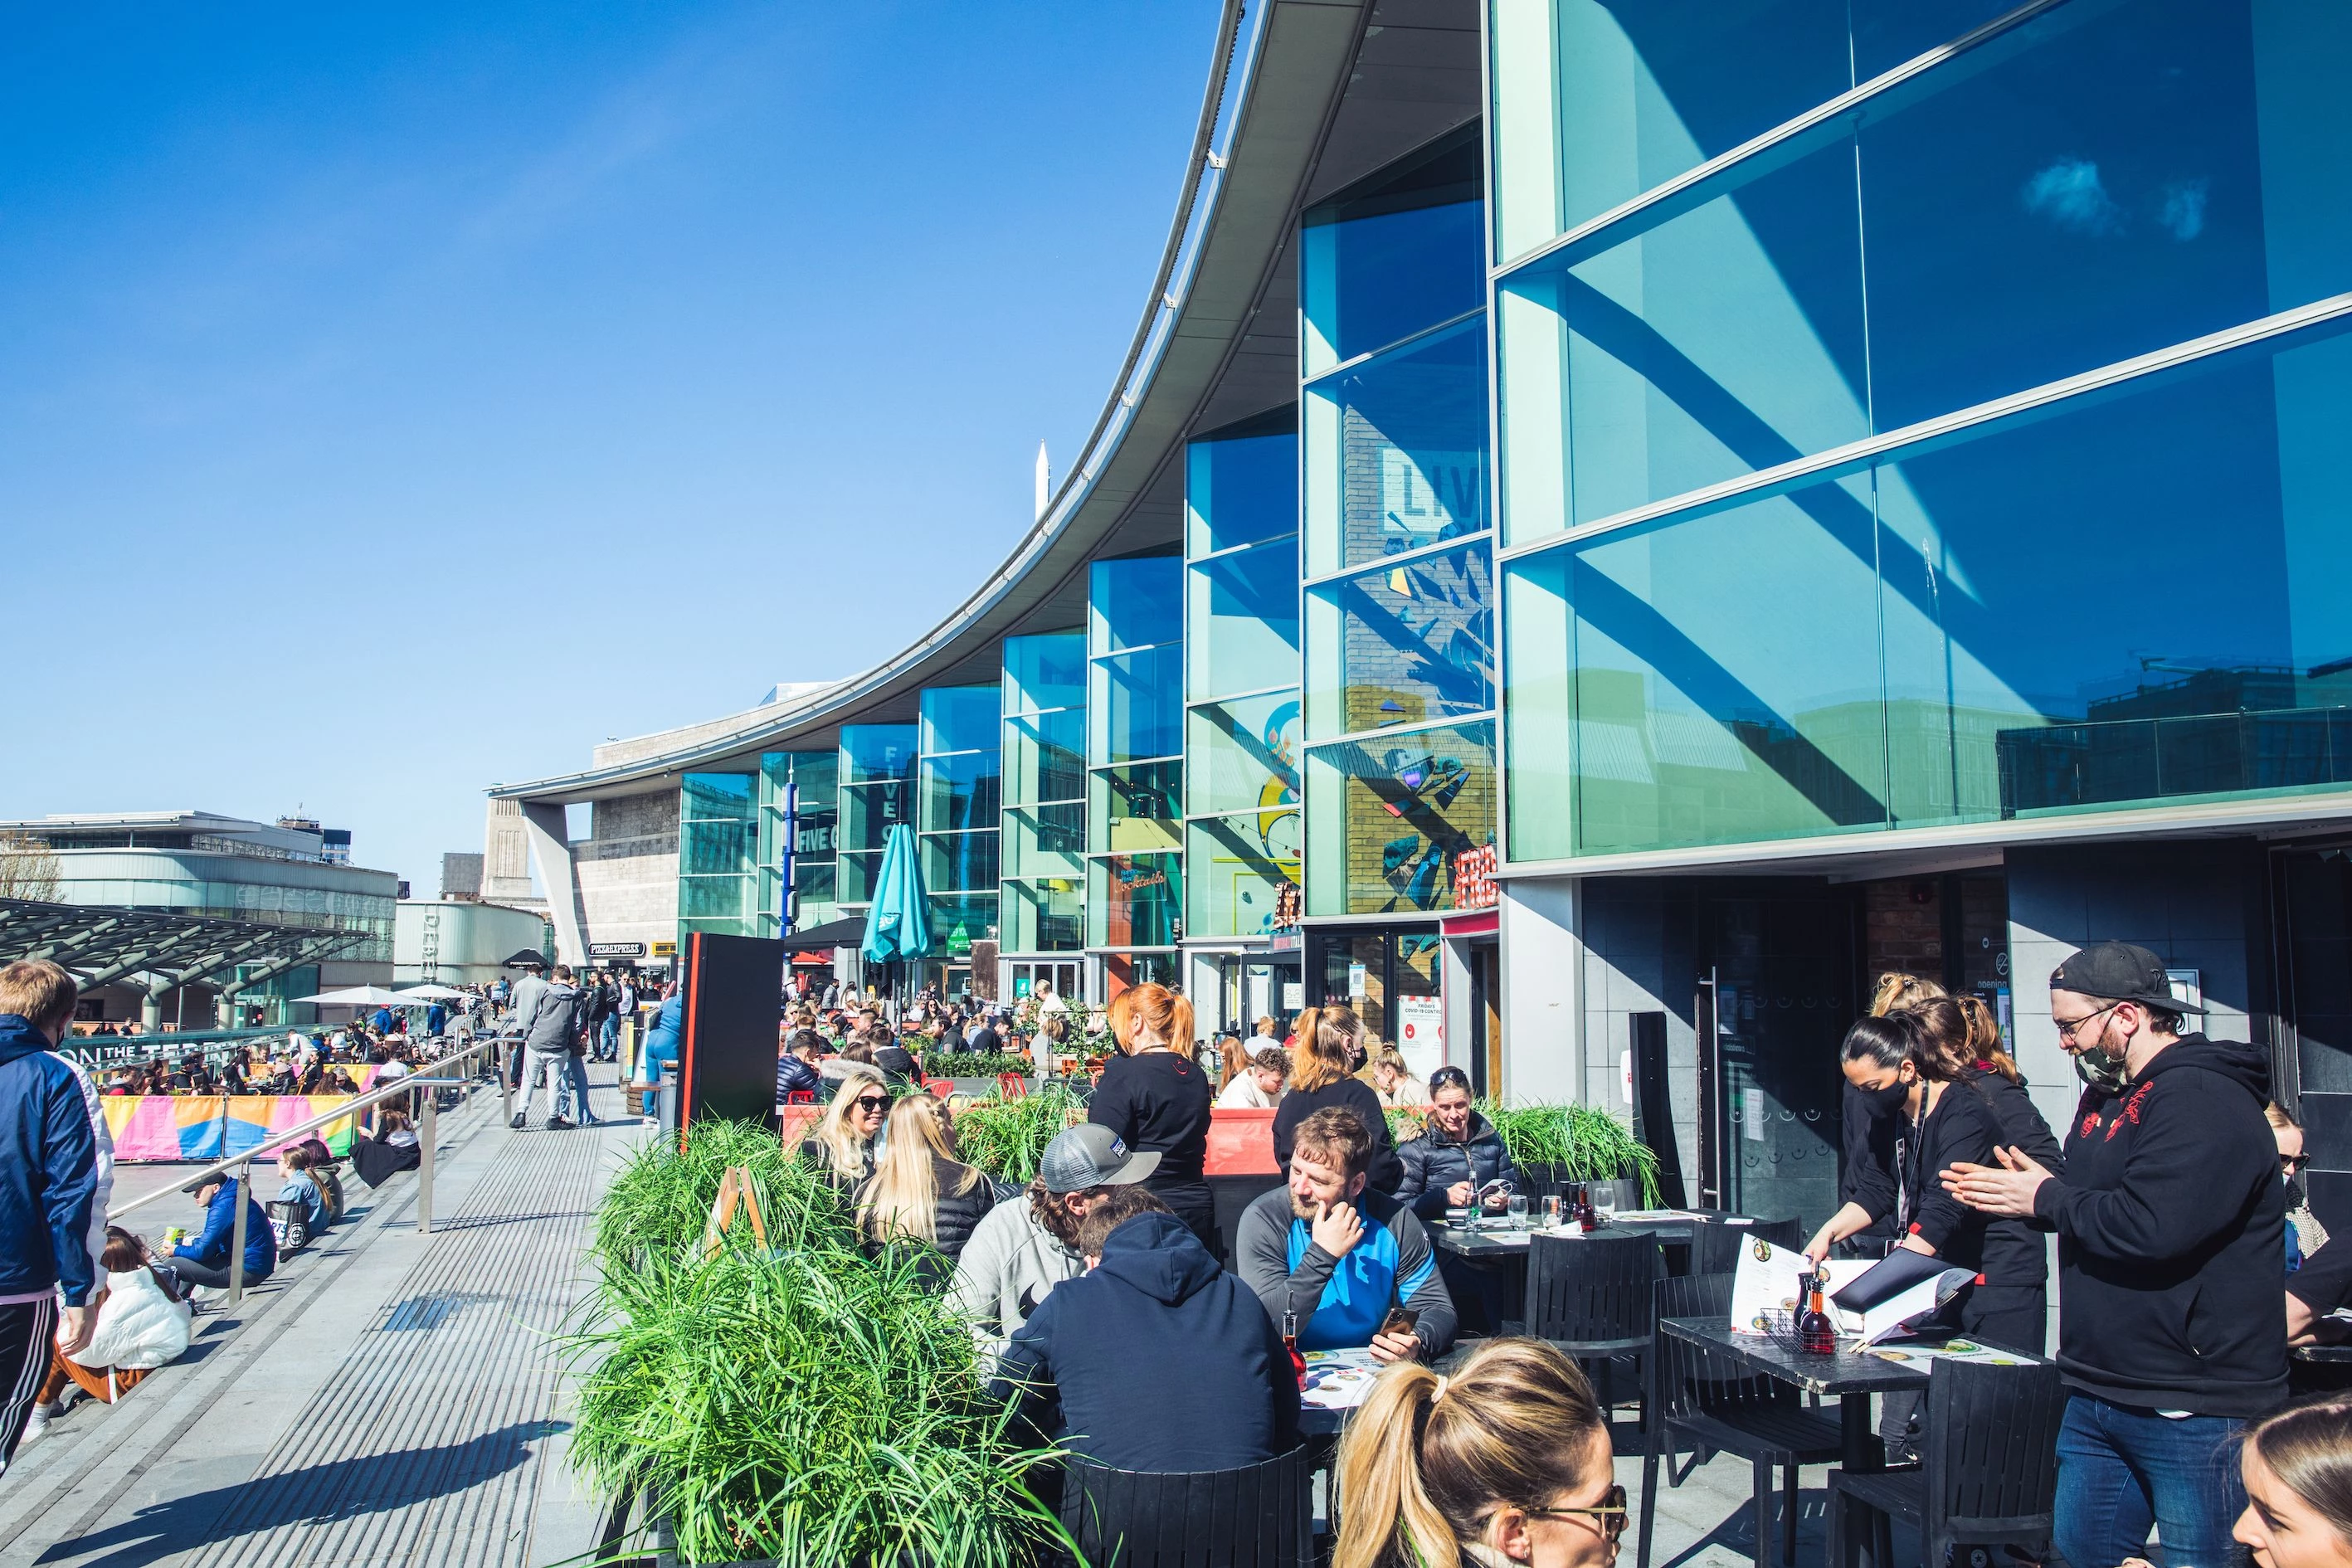 A busy terrace at Liverpool ONE